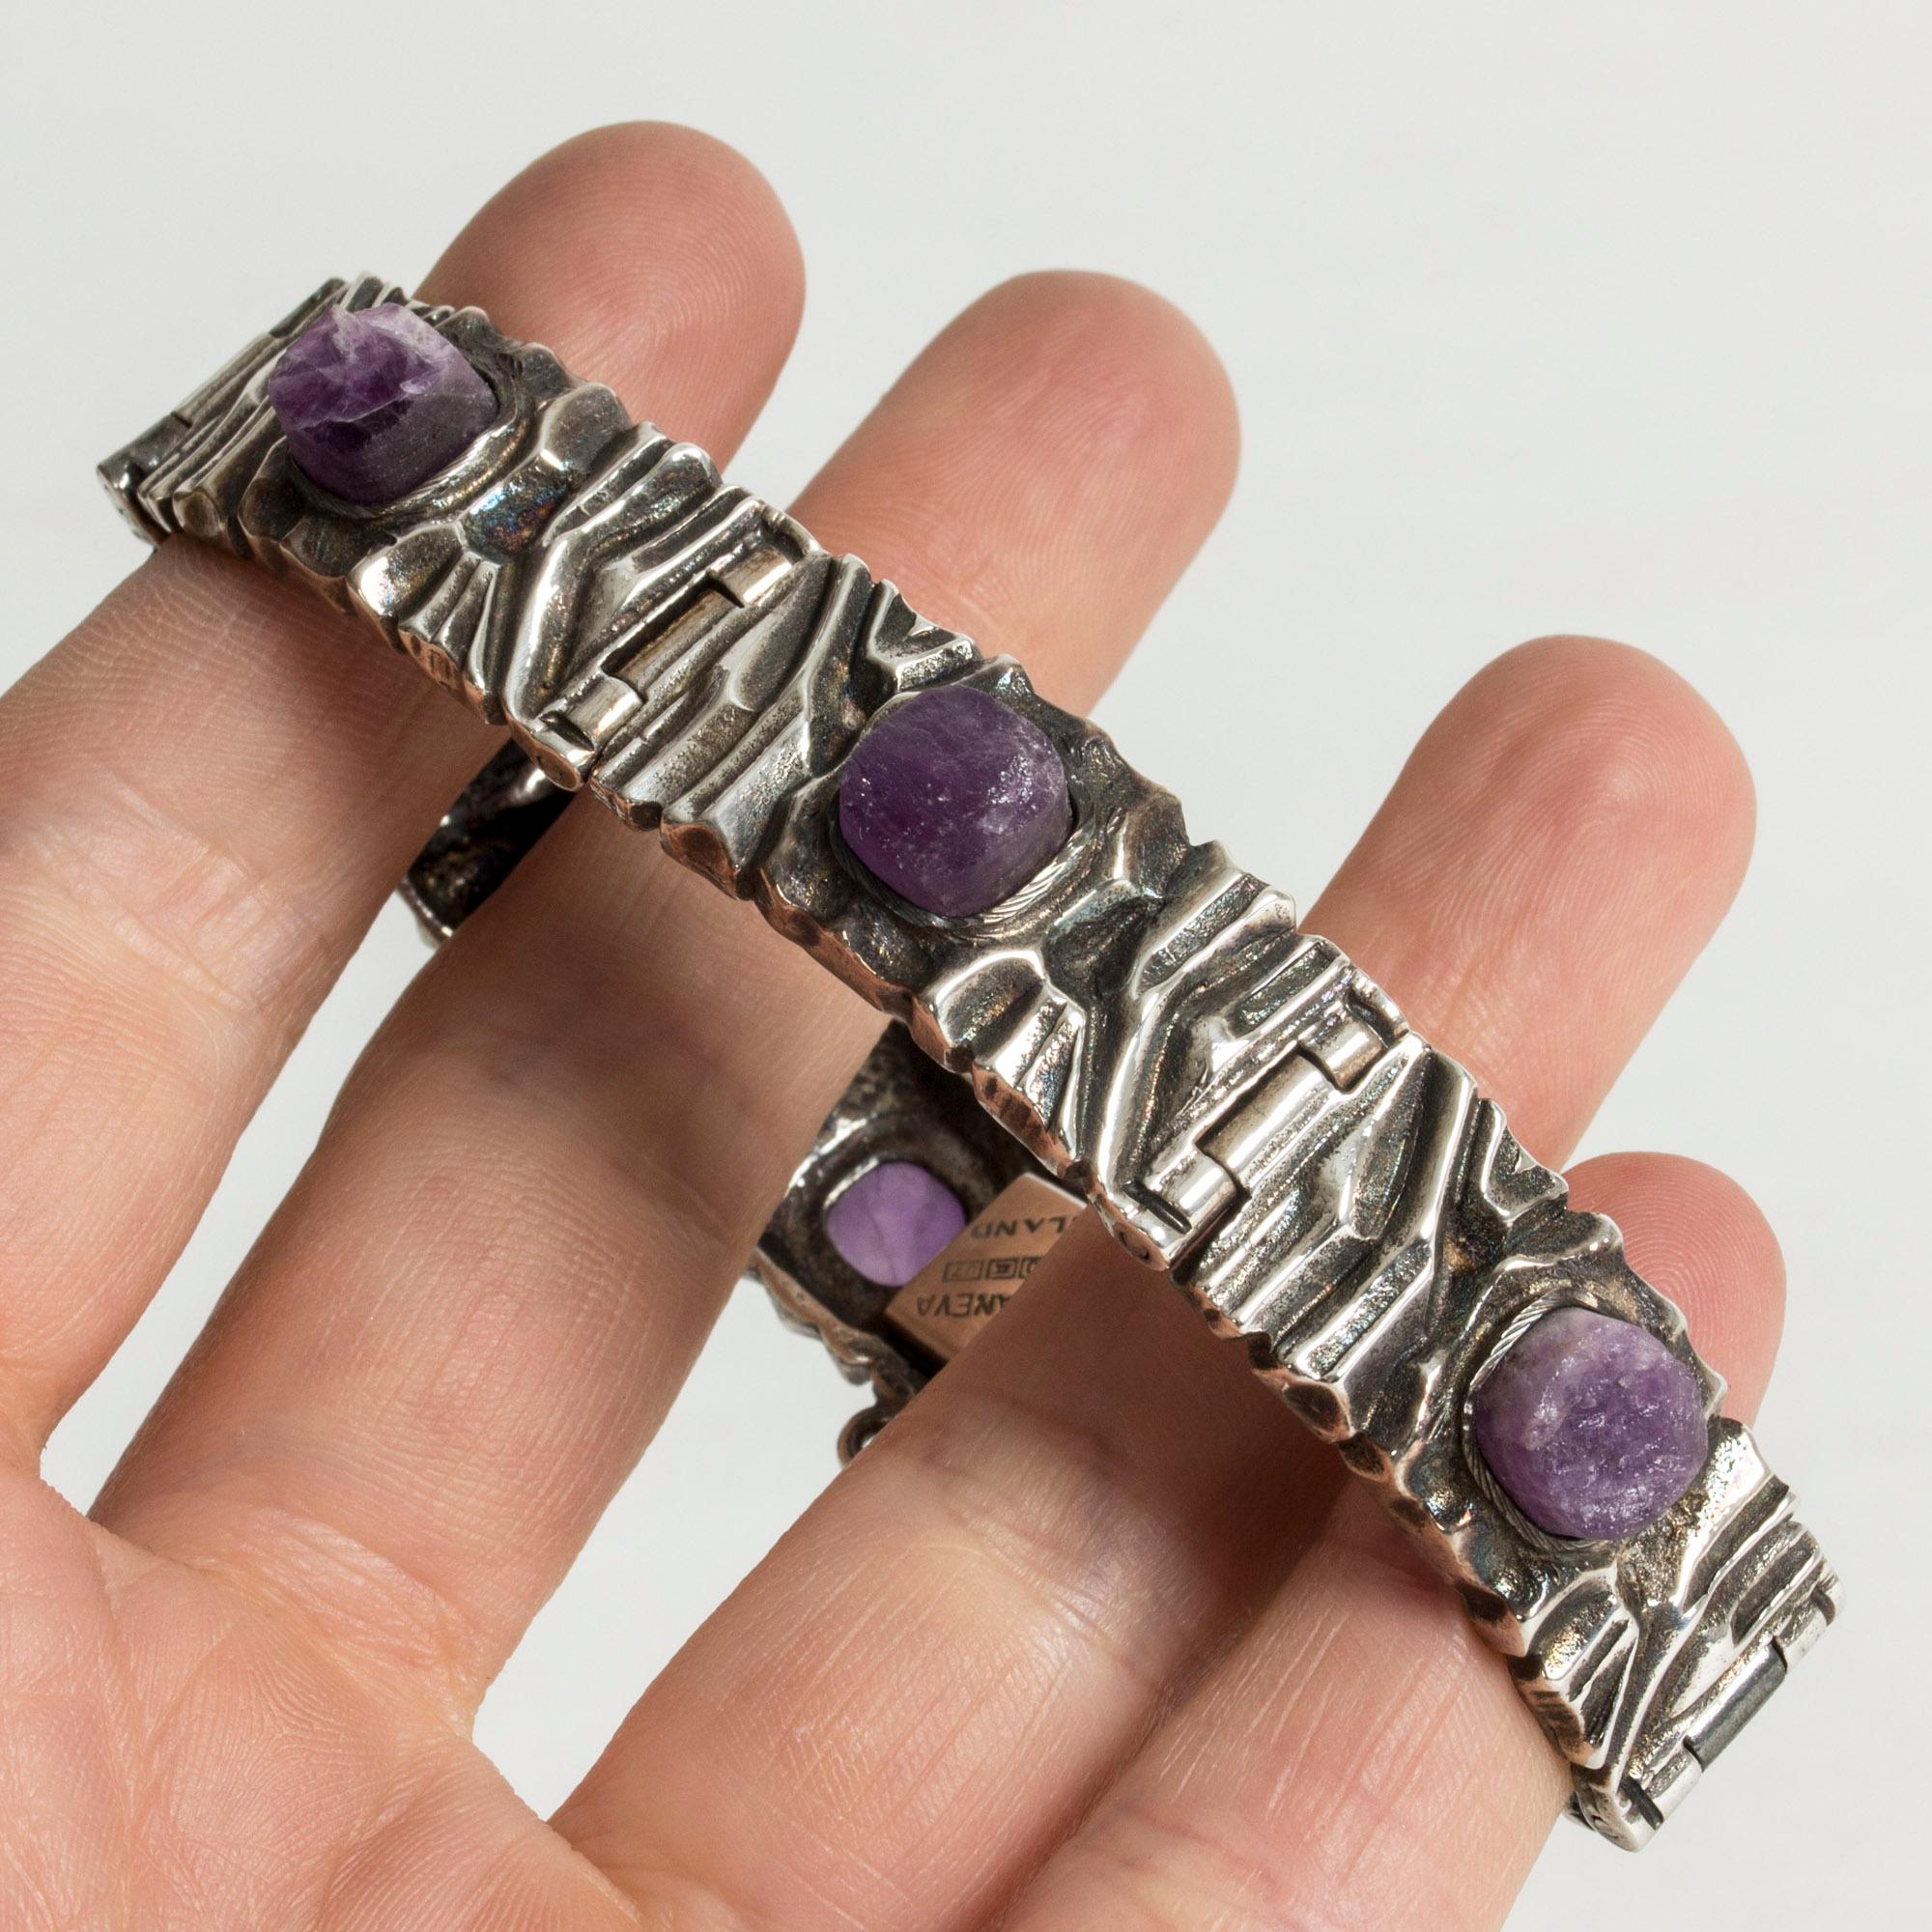 Awesome silver bracelet in a brutal, blackened design with raw, protruding amethyst by Pentti Sarpaneva. A bracelet that wants to be noticed.